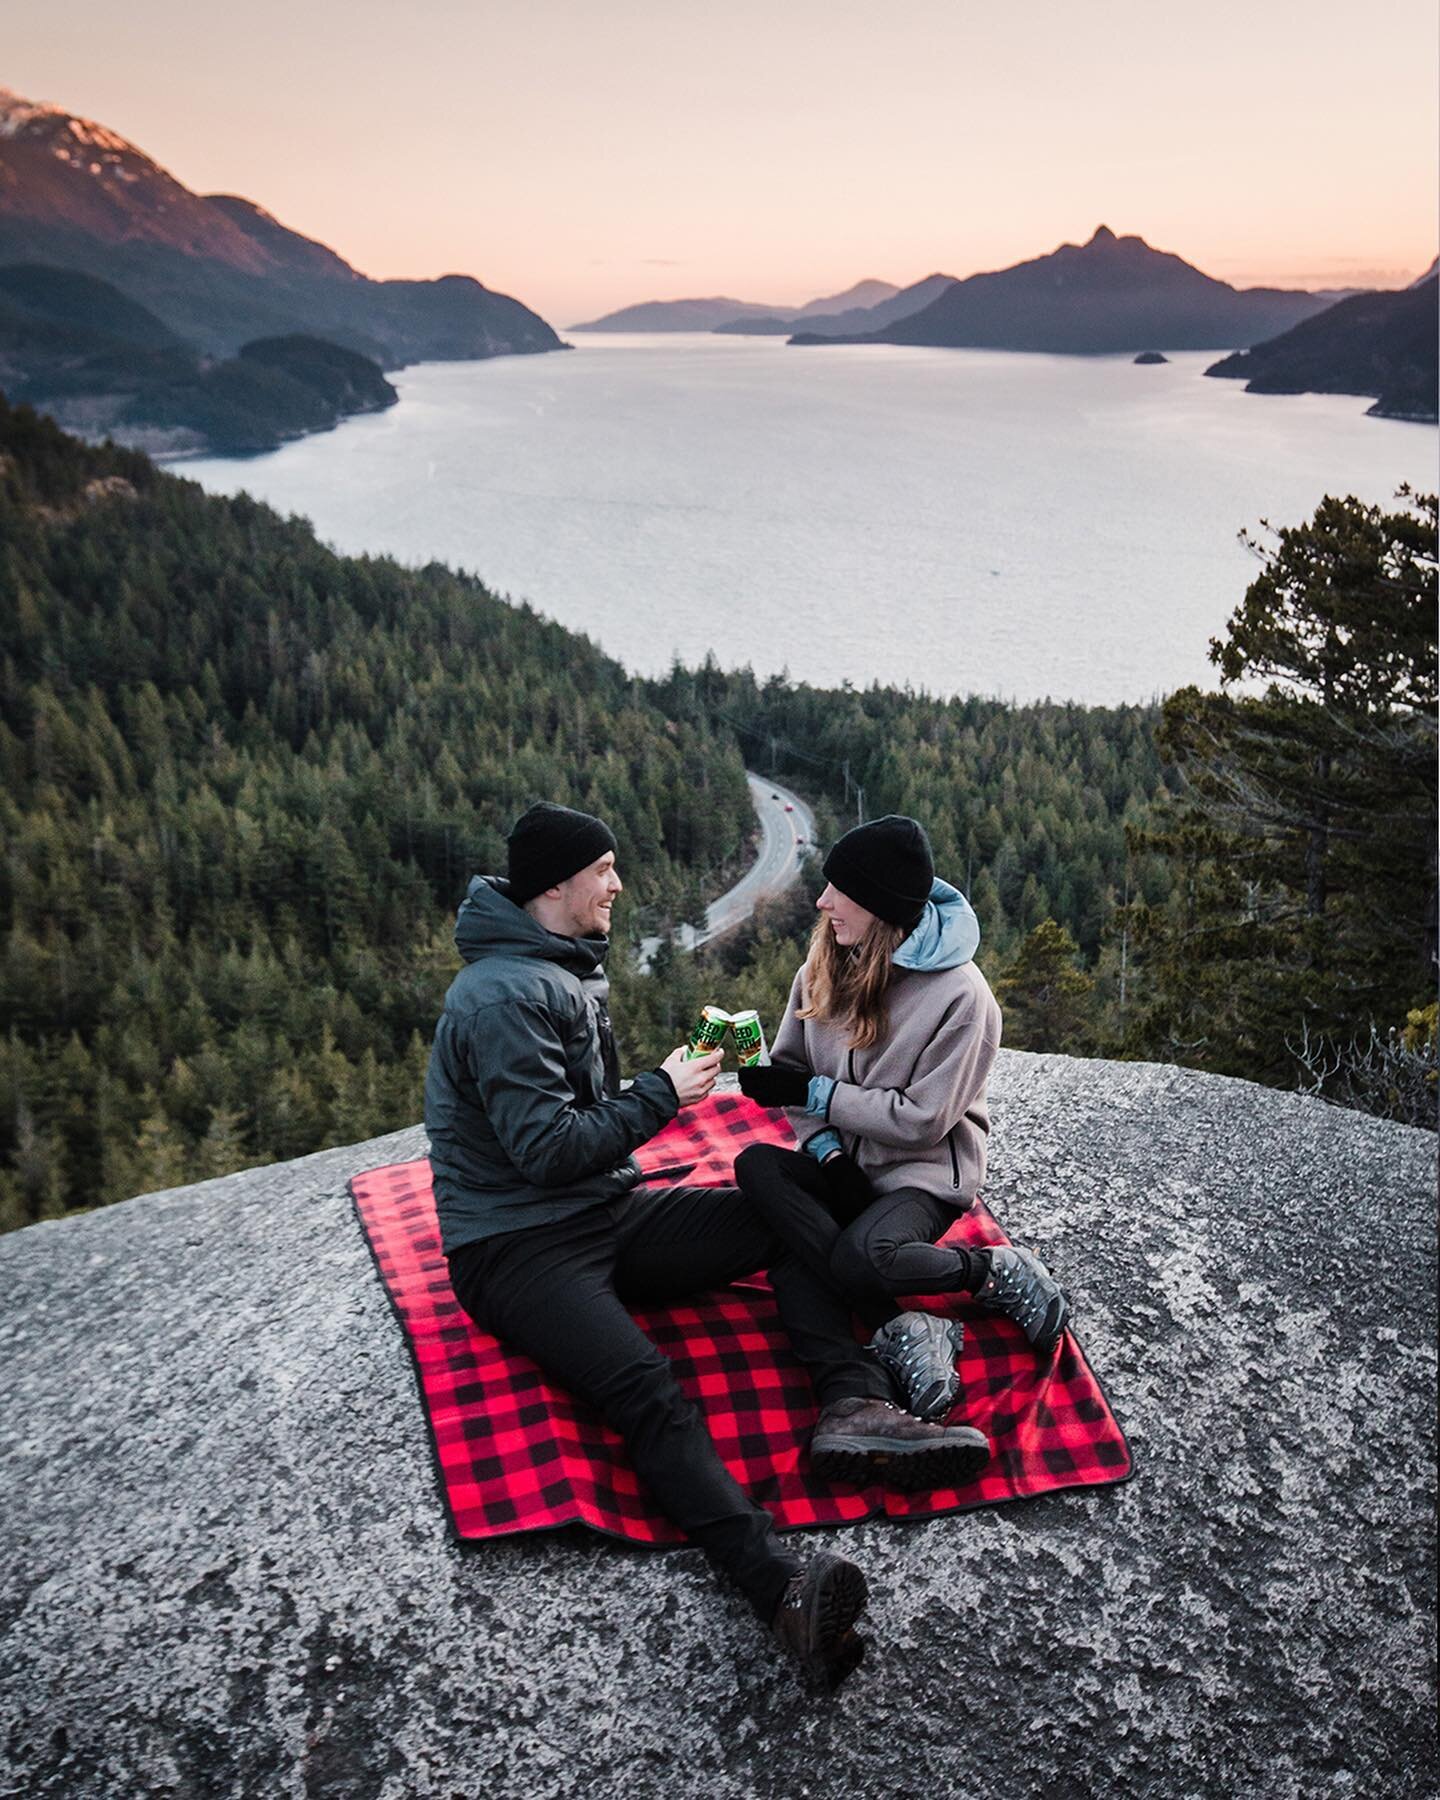 Something I love about living in British Columbia is being able to head straight to the mountains after work to enjoy a gorgeous sunset over the ocean with @martynkkaa.  We brought along some @freedearthtea with us to enjoy along with the view. Freed